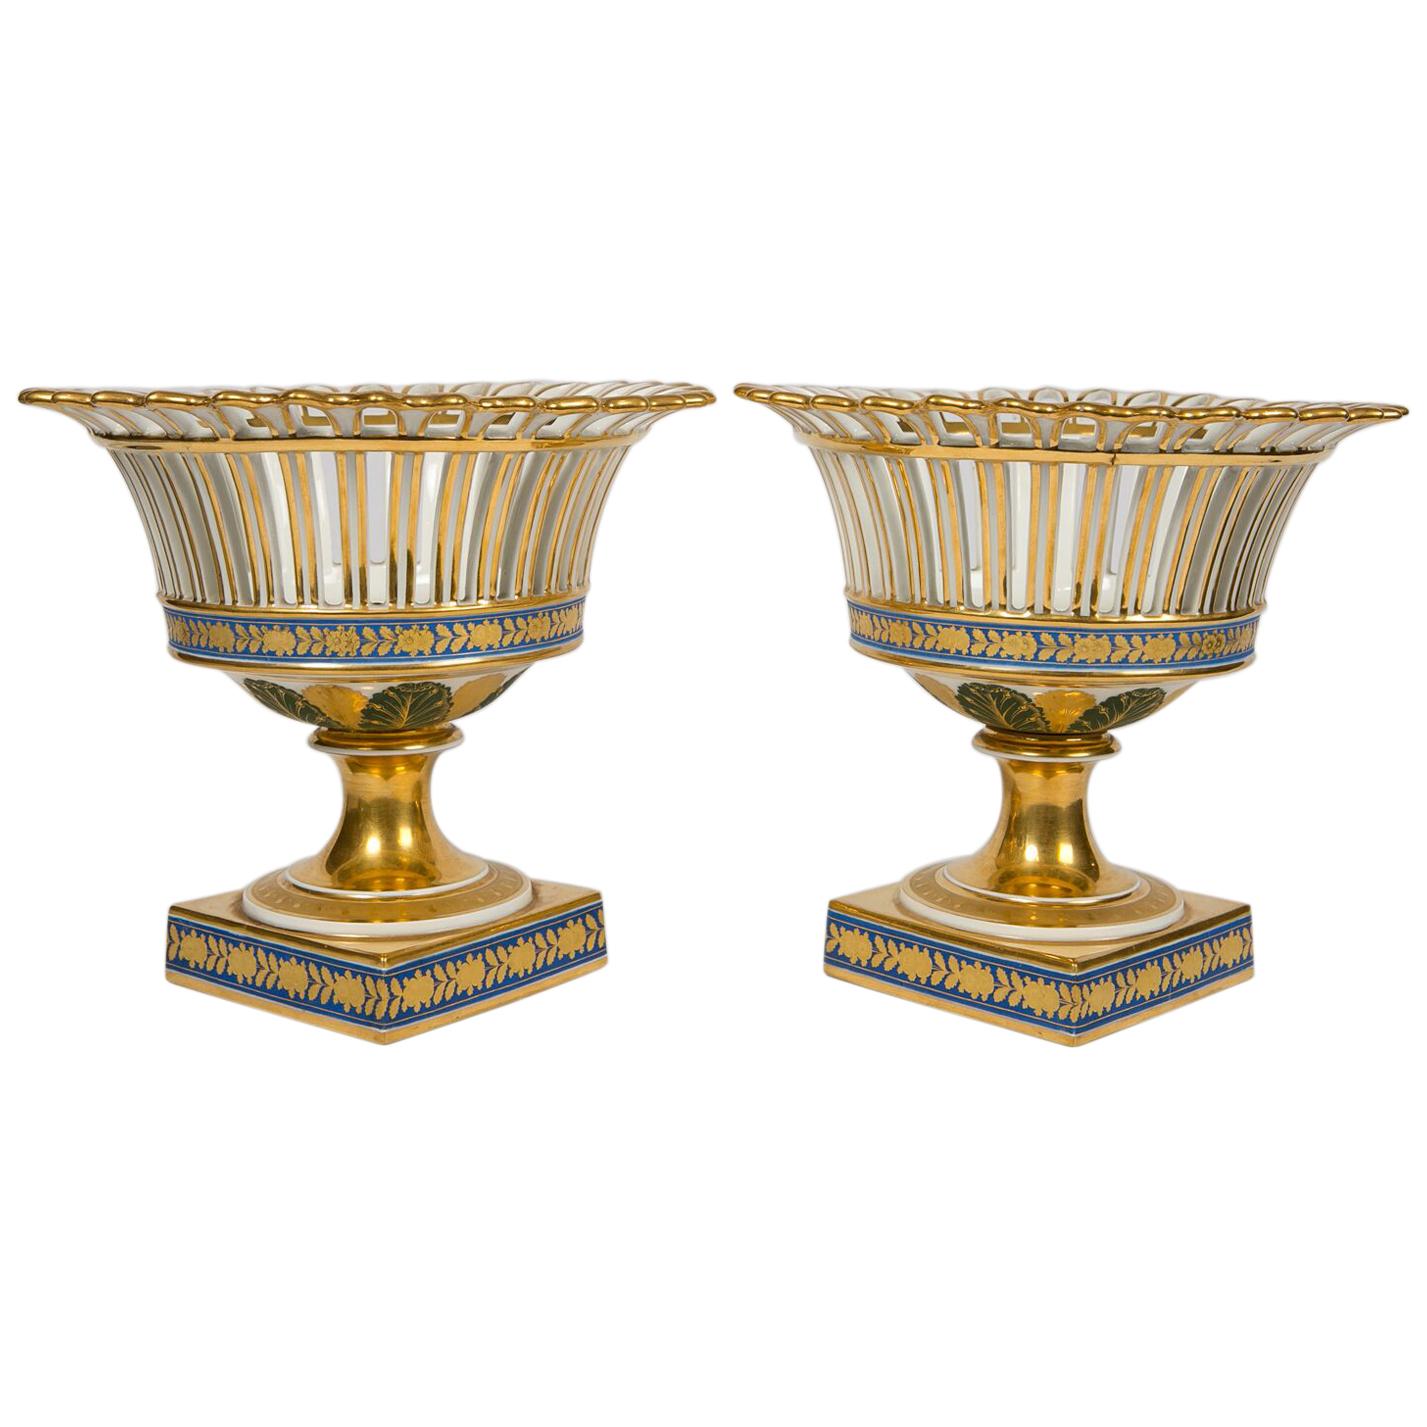 Pair of Antique French Porcelain Gilded Baskets 'Corbeilles' Mid 19th Century